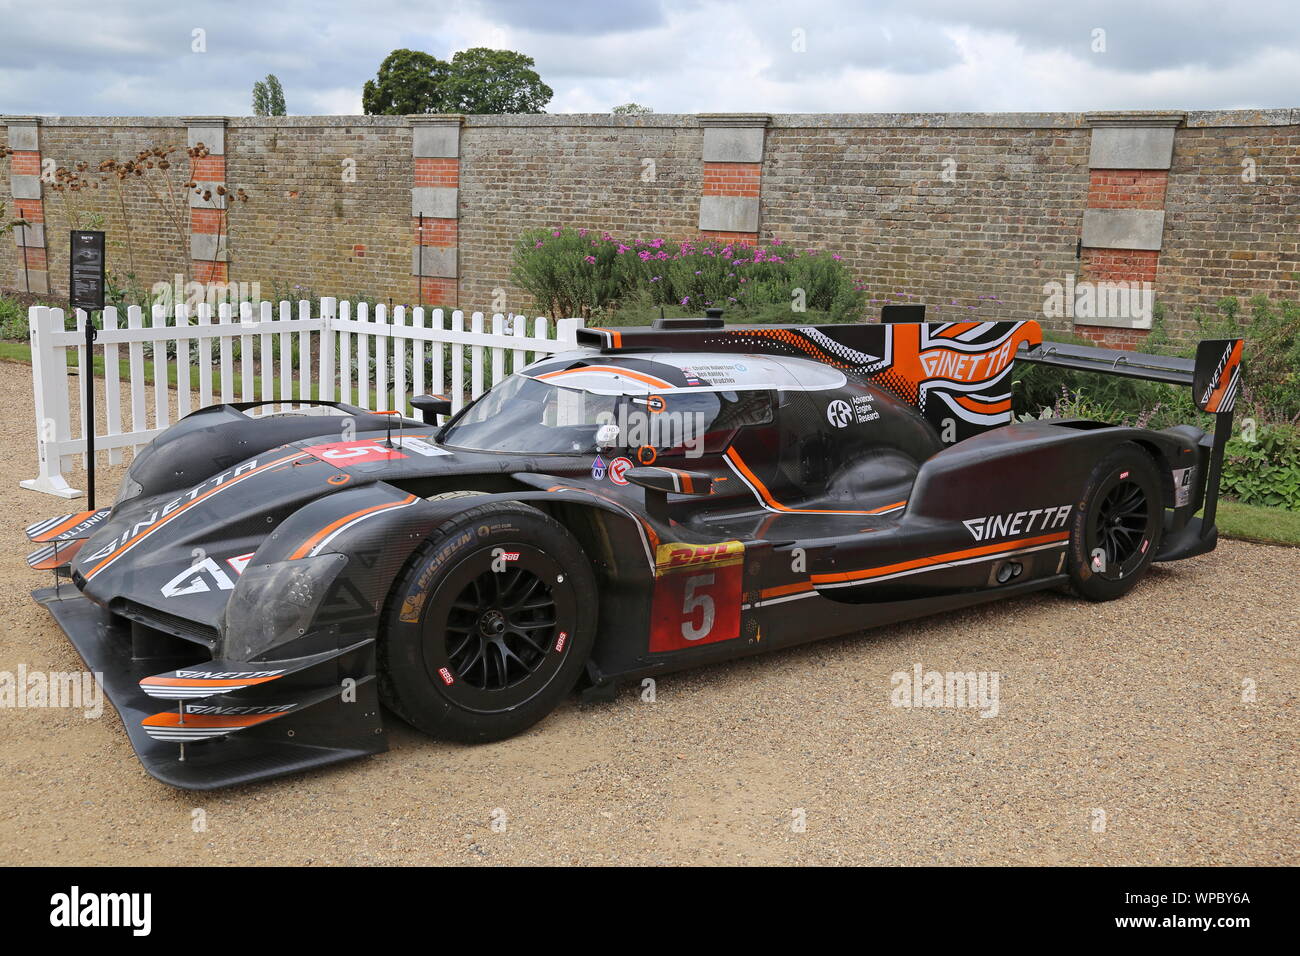 Ginetta G60 Lt P1 18 Future Classic Concours Of Elegance 19 Hampton Court Palace East Molesey Surrey England Great Britain Uk Europe Stock Photo Alamy